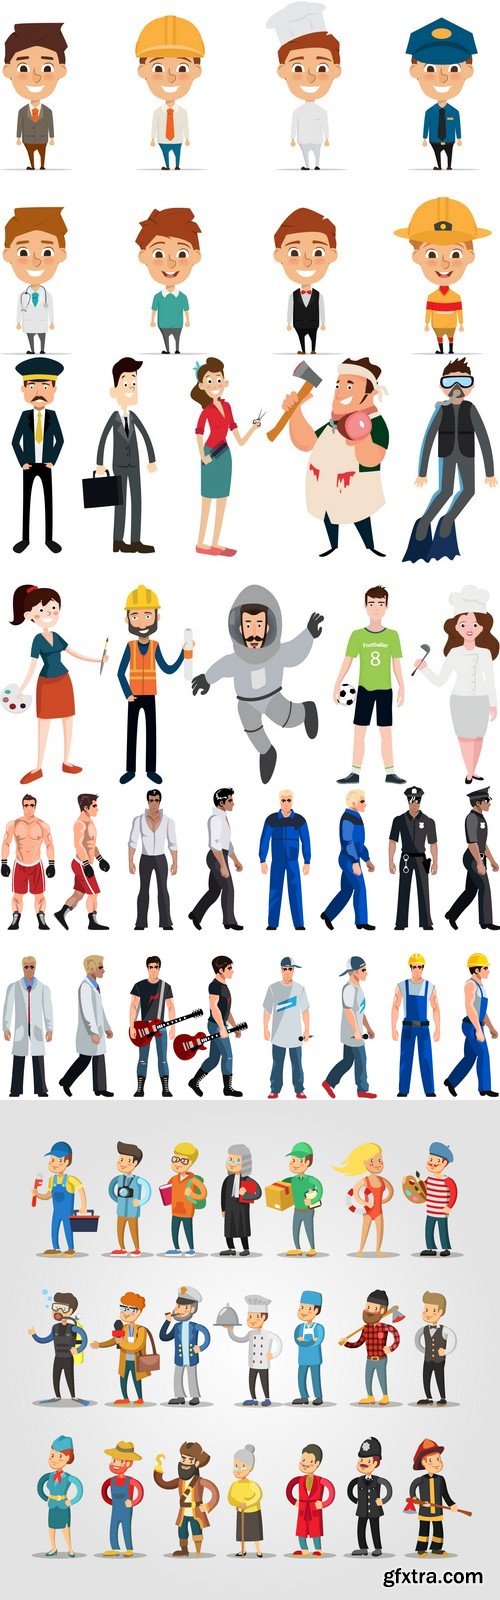 Vectors - People of Different Professions 25